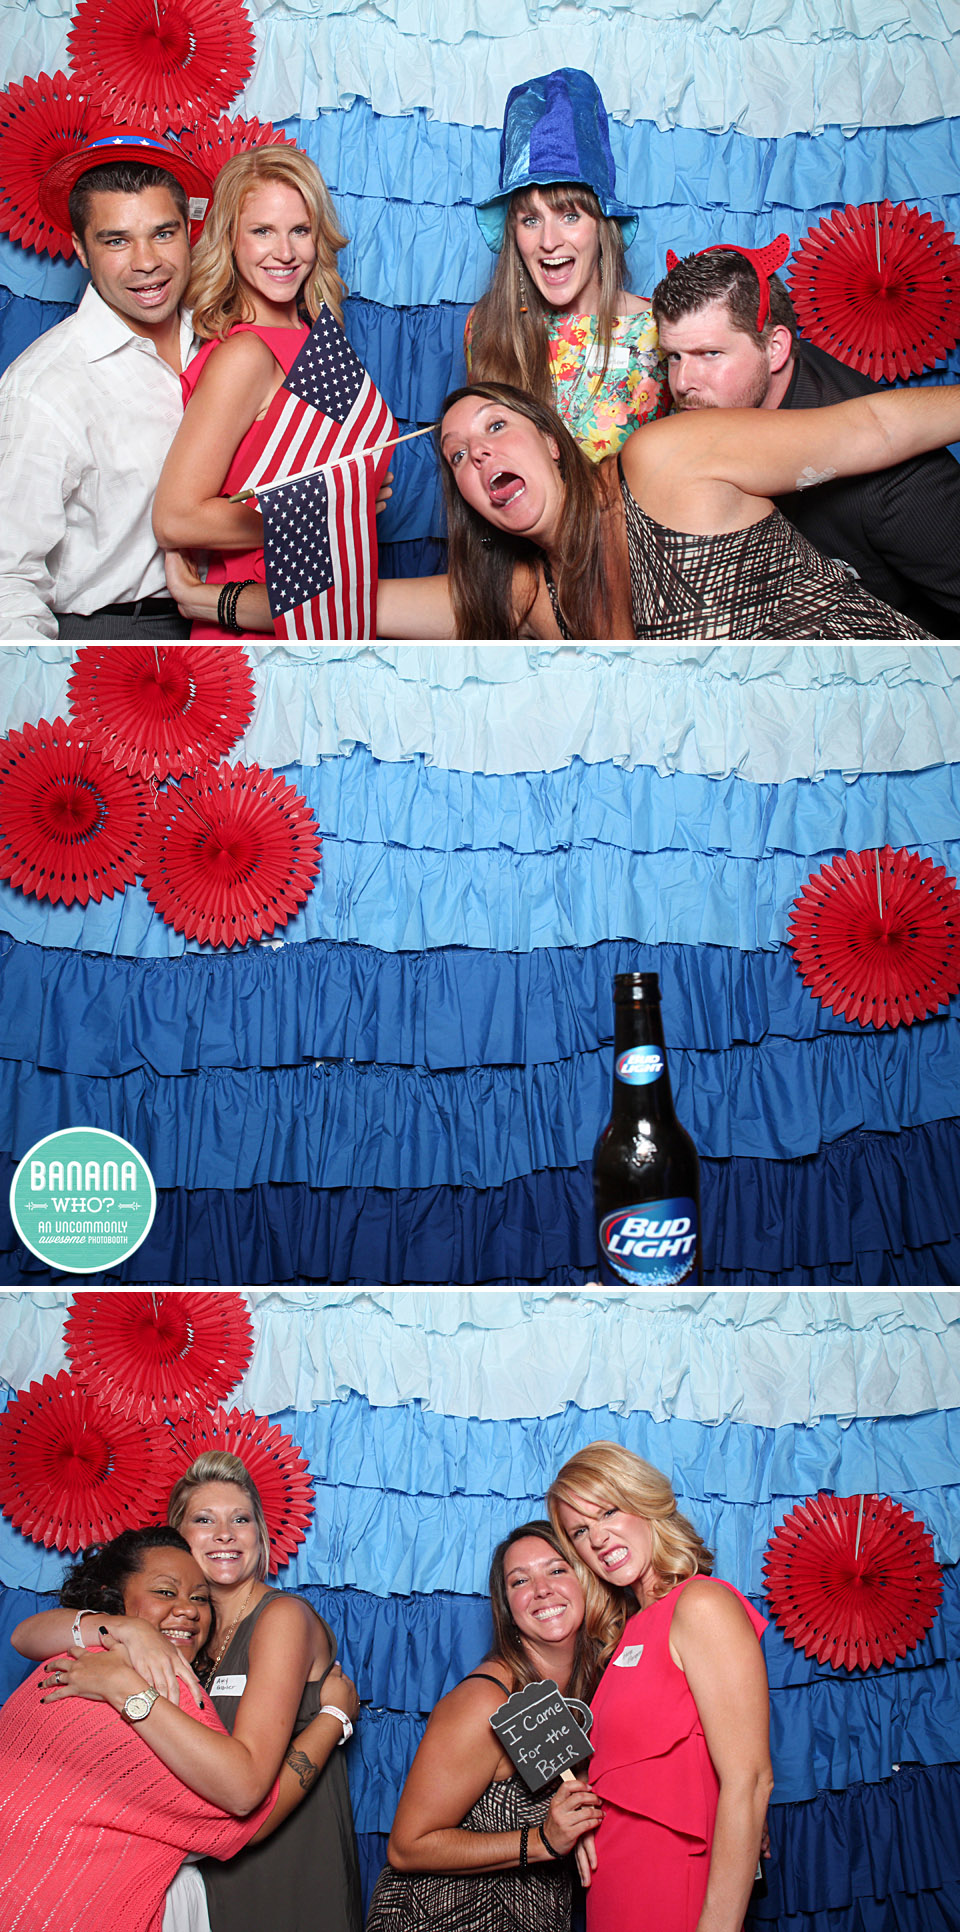 Independence, Hand Sewn Backdrops, Photobooths in the Midwest, Weddings, Reception ideas